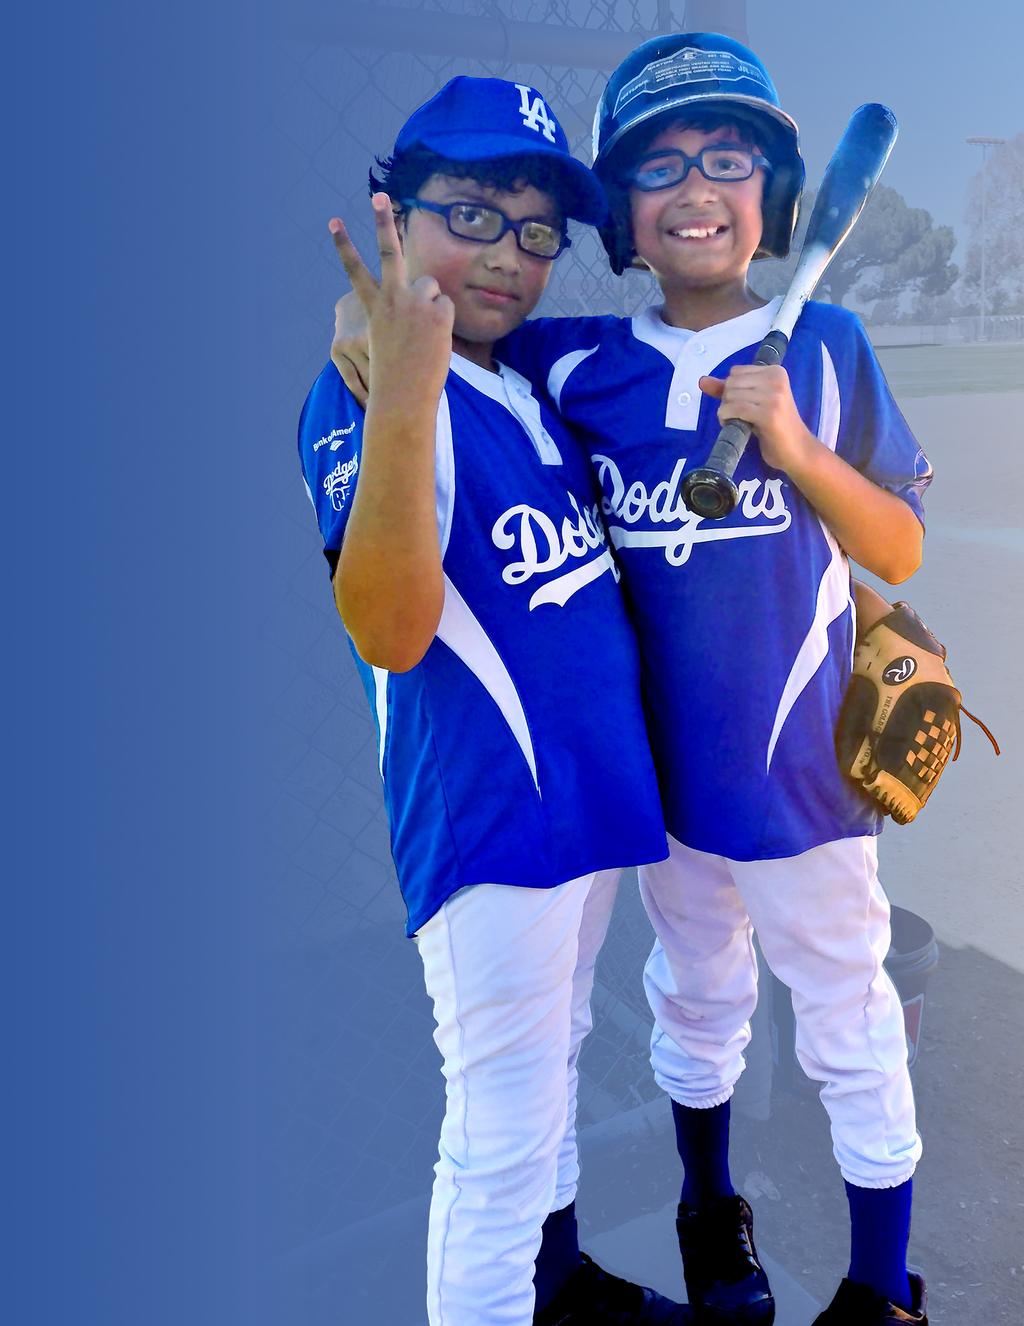 Due to being a part of the Dodgers RBI program, our sons learned about teamwork, sportsmanship, and having a good work ethic. In their own words: Dodgers RBI has made an impact on us.